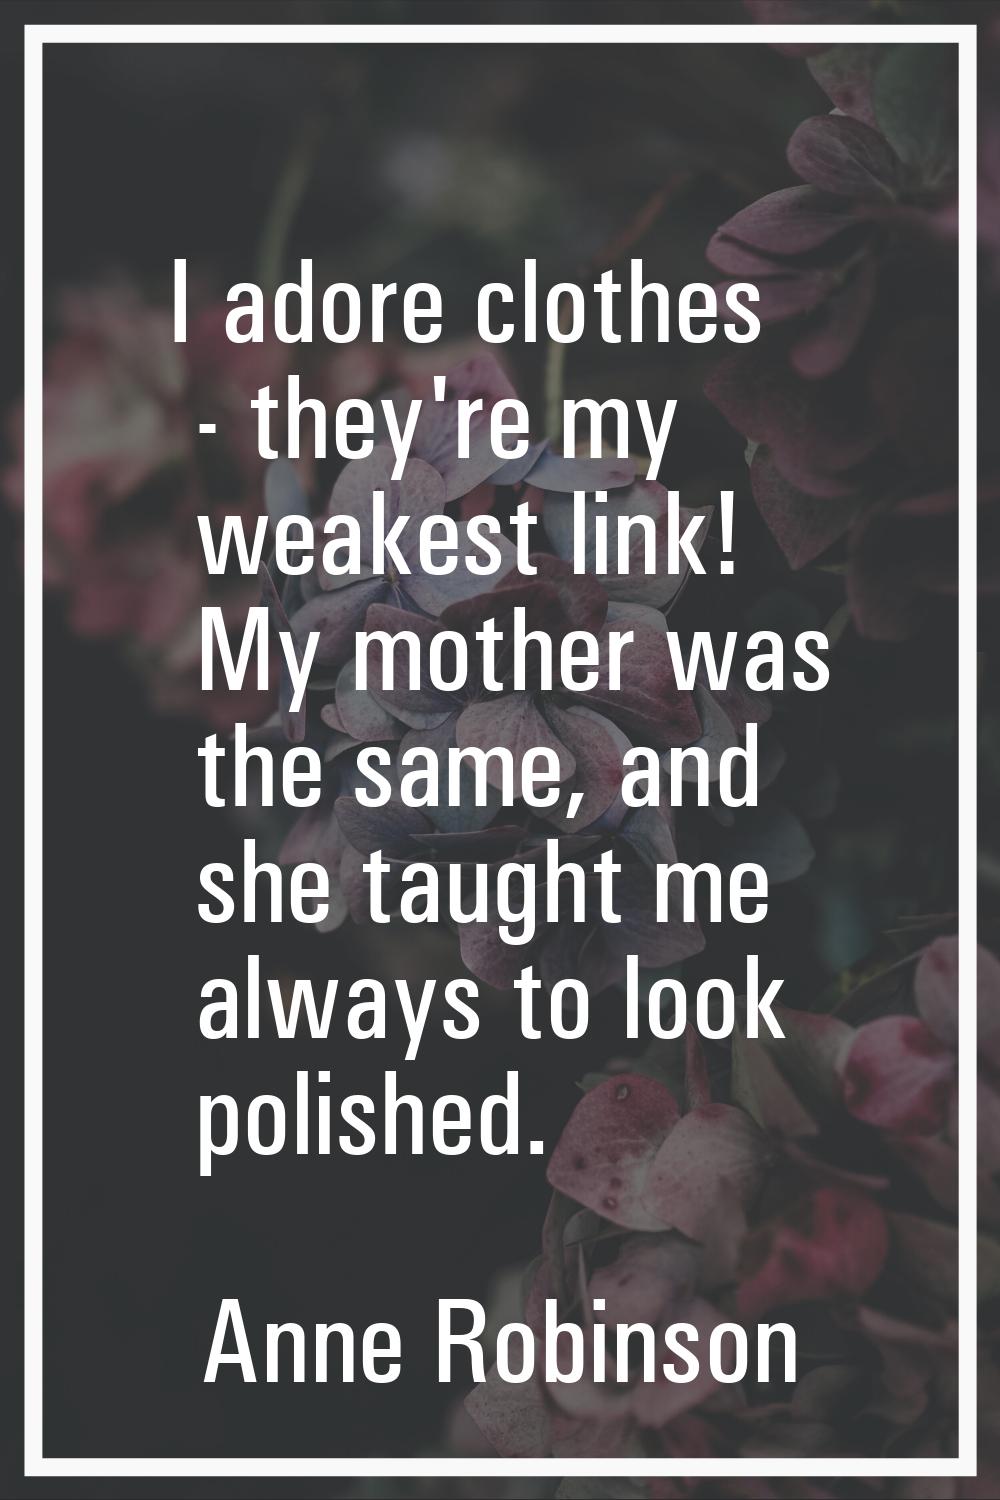 I adore clothes - they're my weakest link! My mother was the same, and she taught me always to look